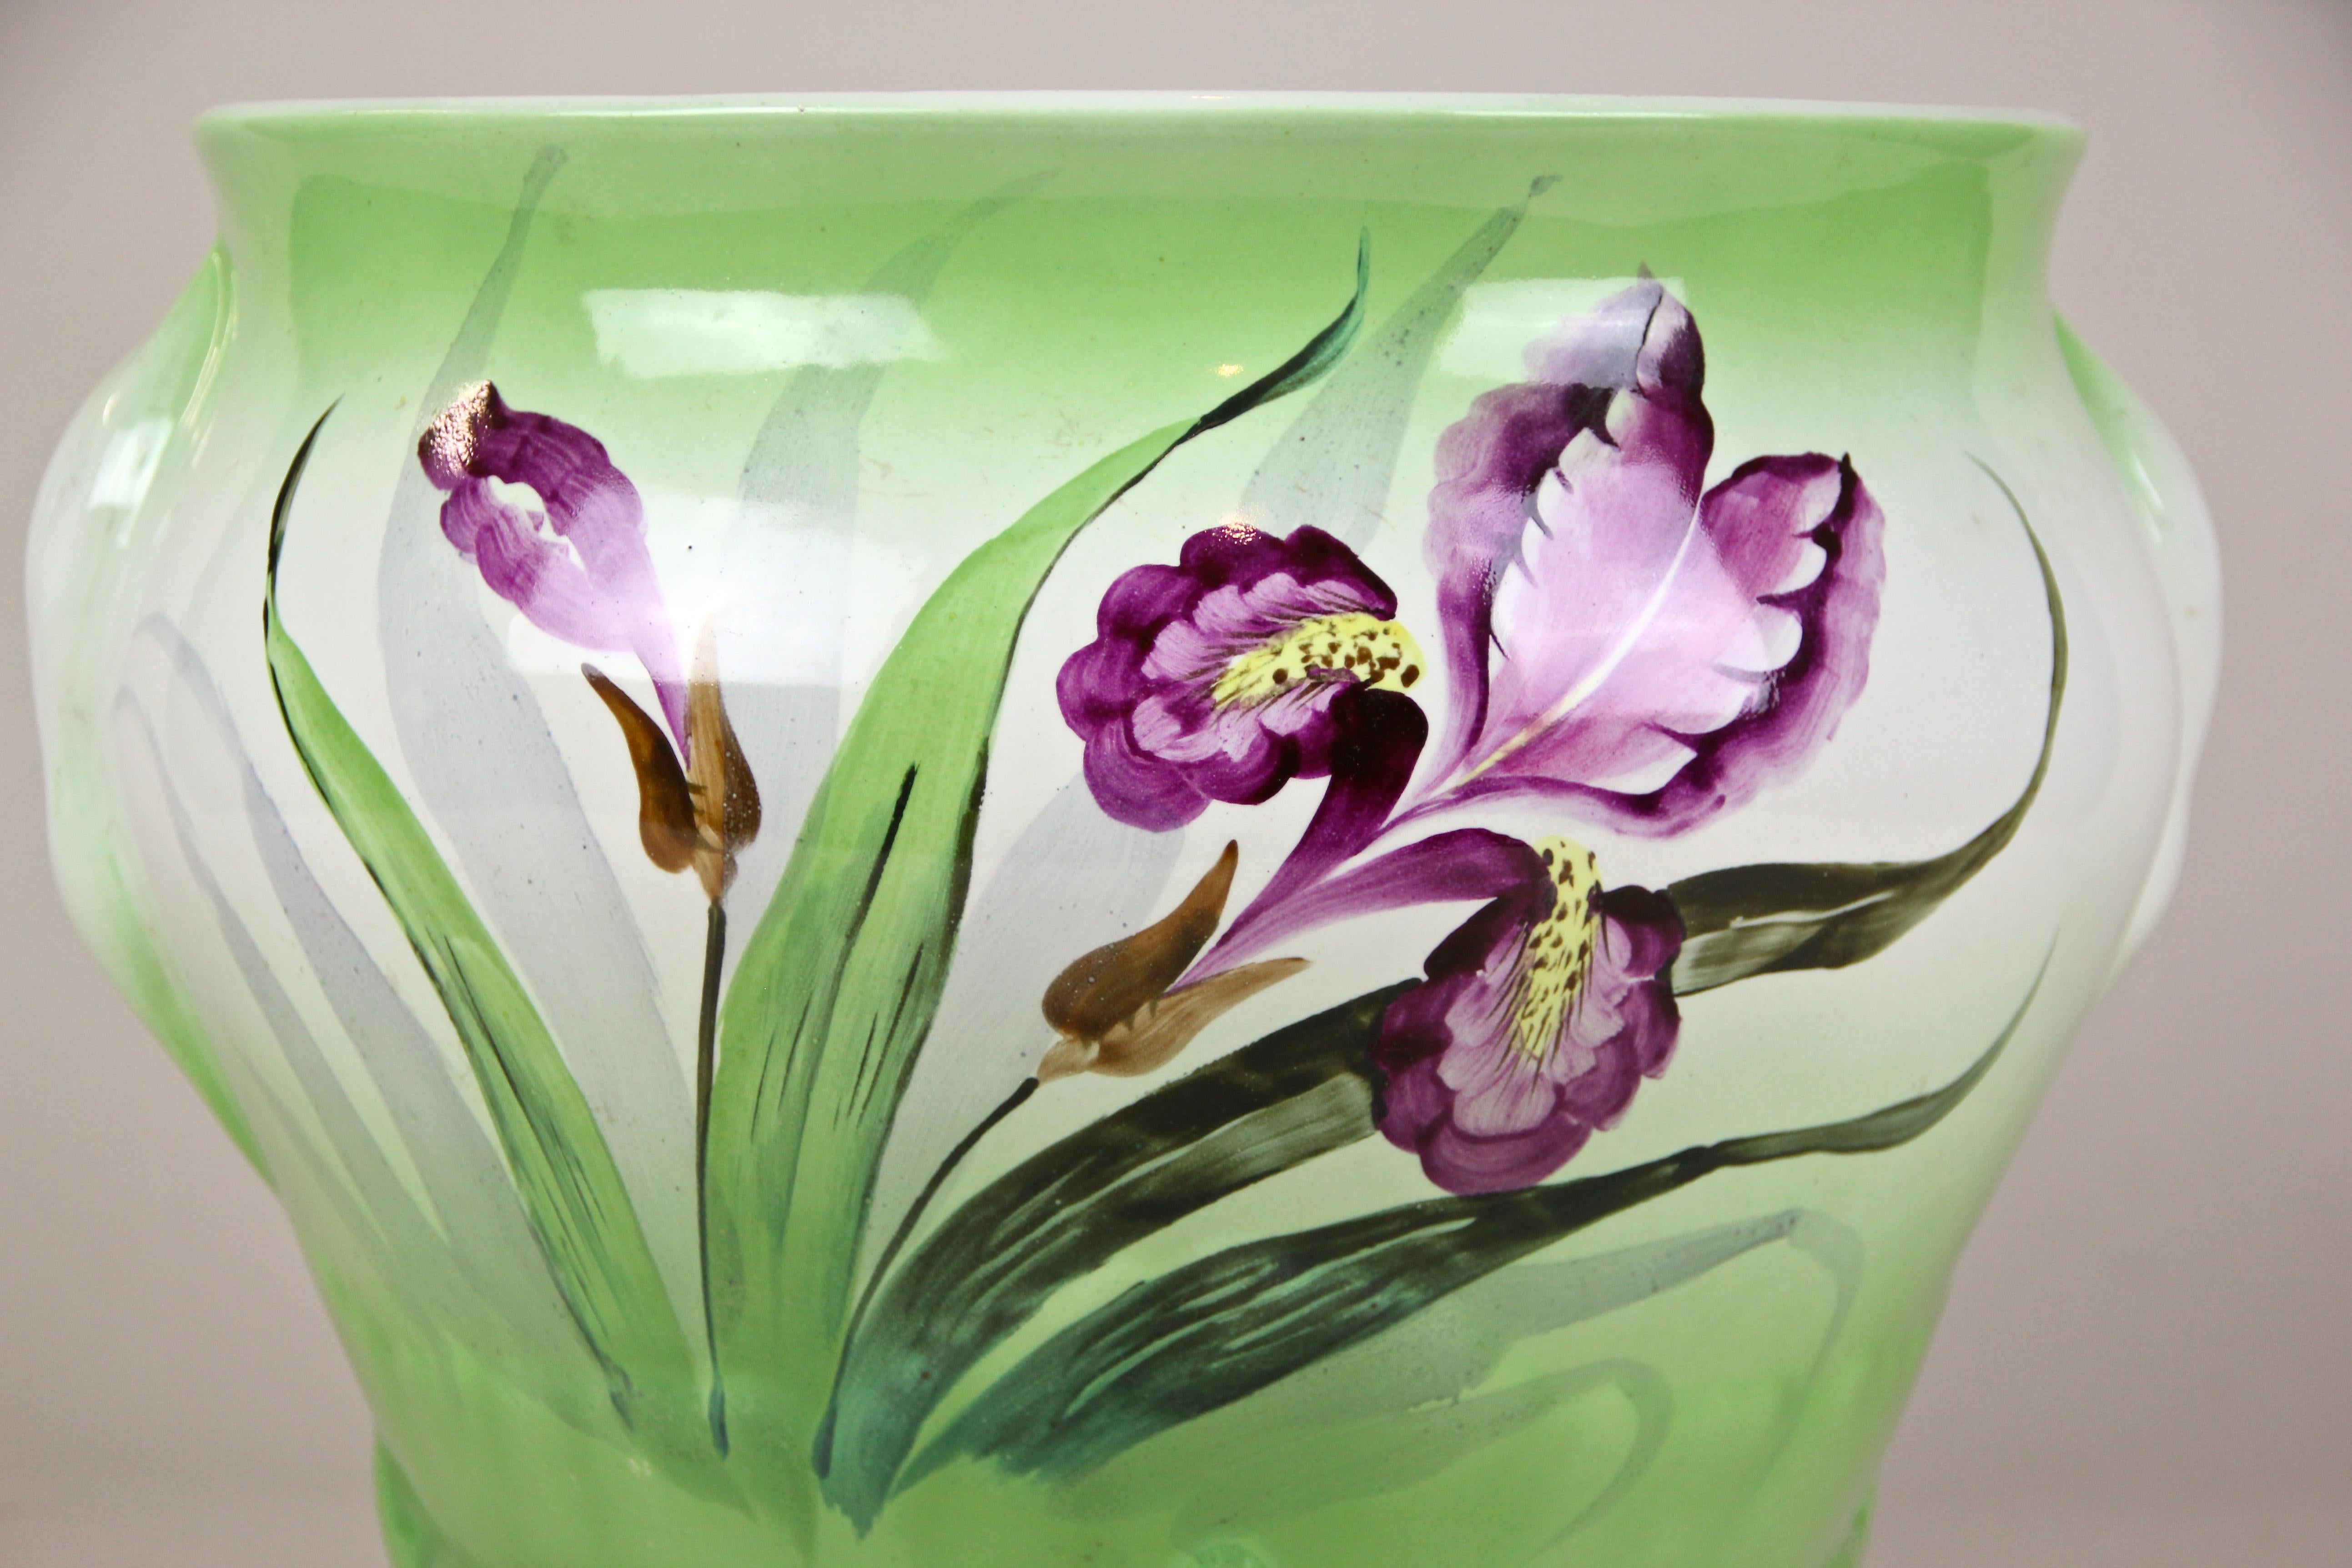 Very decorative hand painted Majolica planter by NIMY Imperiale Royale from Belgium, circa 1915. This late Art Nouveau cachepot shows a fantastic hand painted floral design in lovely purple and green tones. The company mark can be found on the